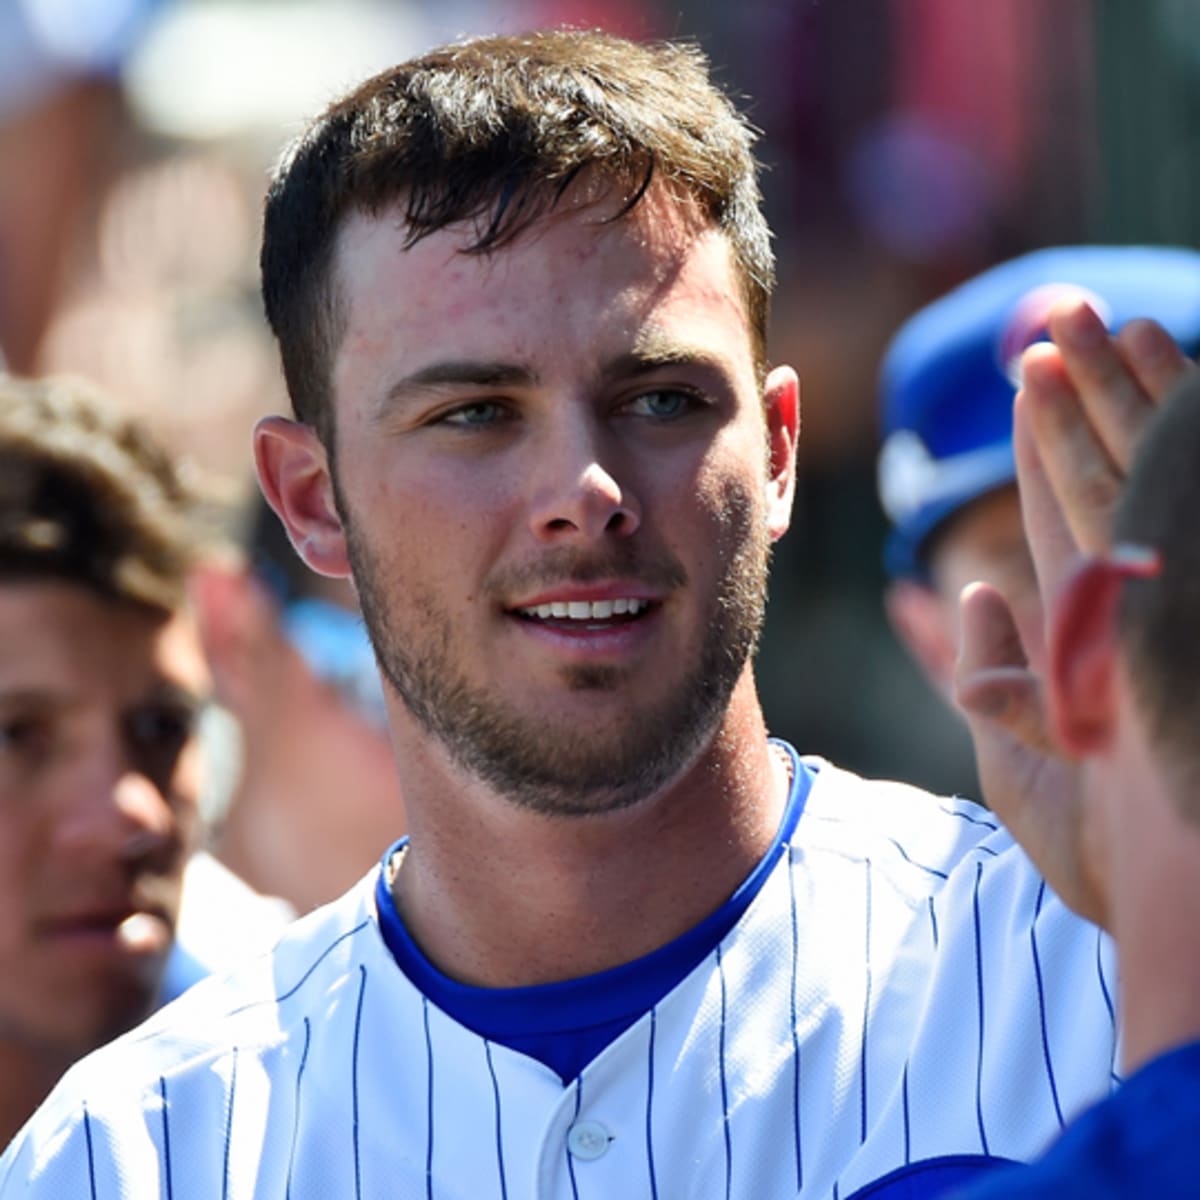 Cubs' Kris Bryant already has his own tribute song - Sports Illustrated